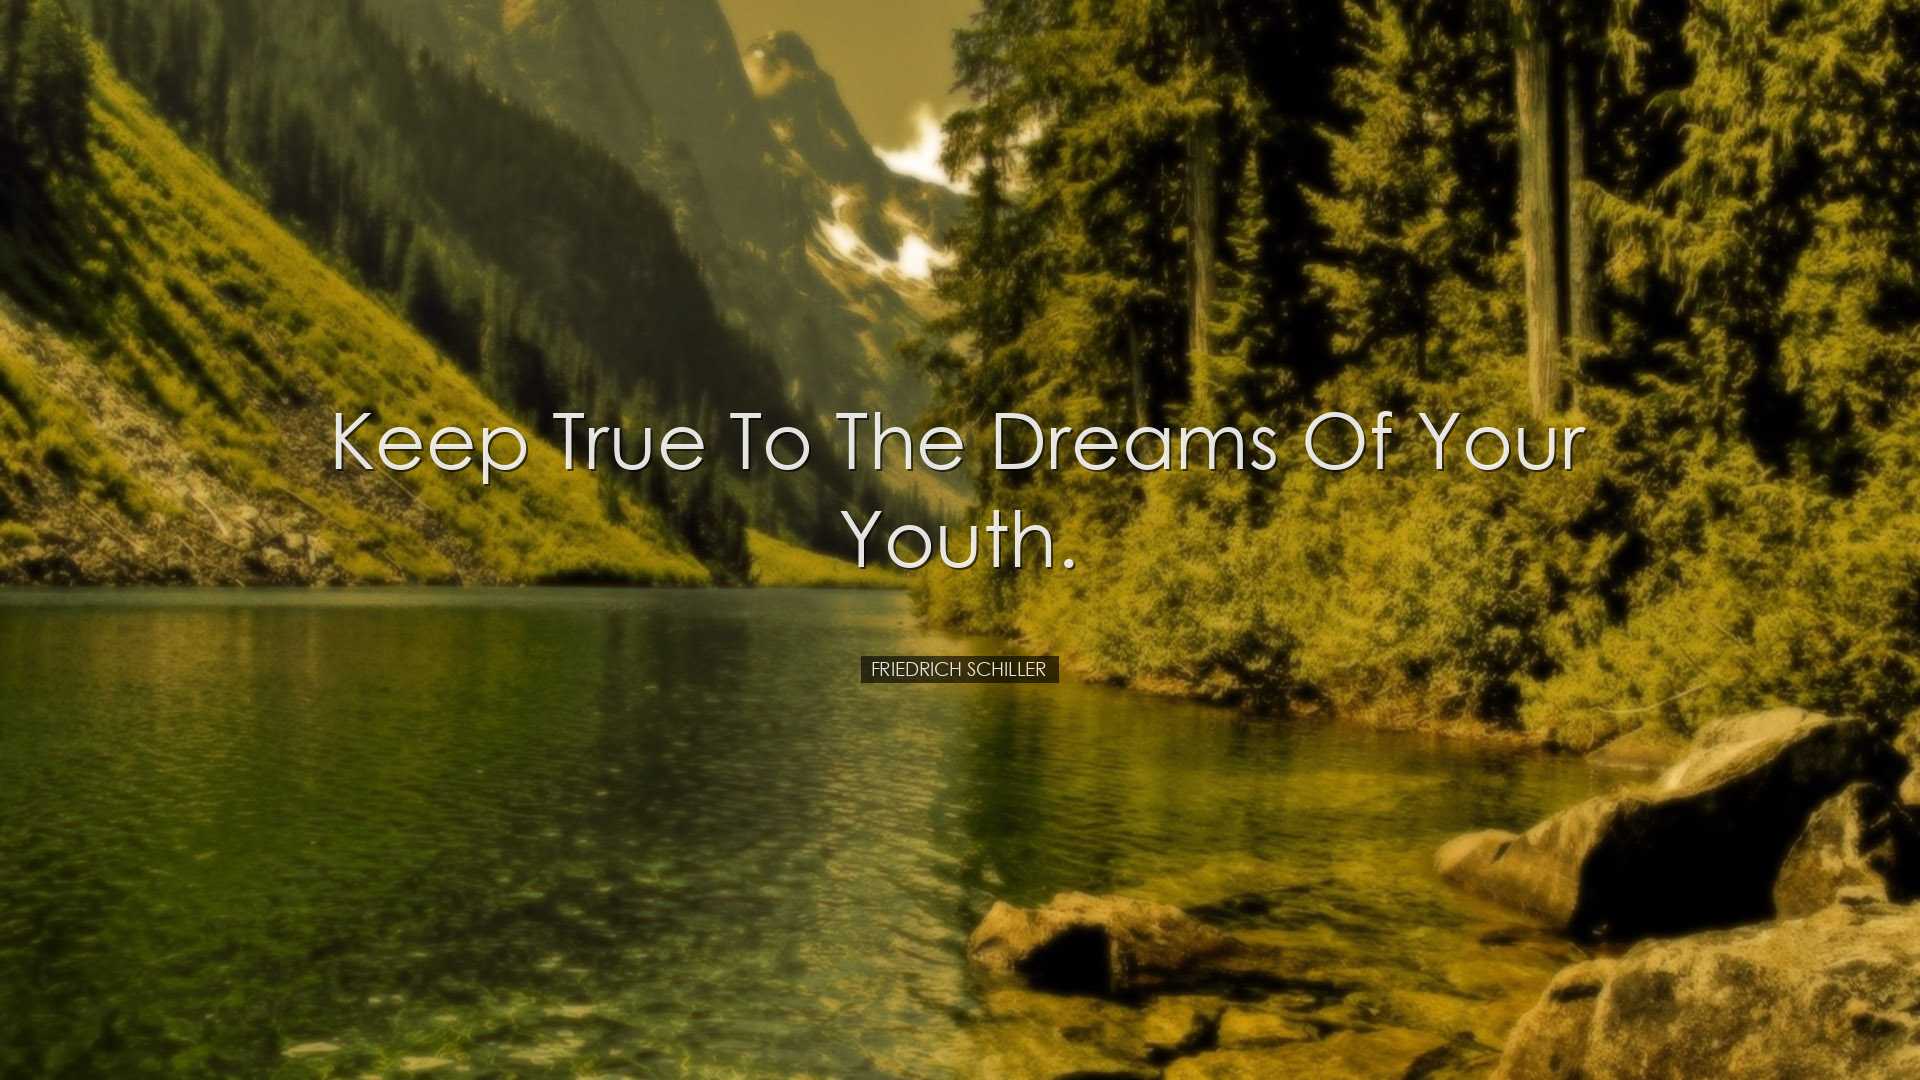 Keep true to the dreams of your youth. - Friedrich Schiller